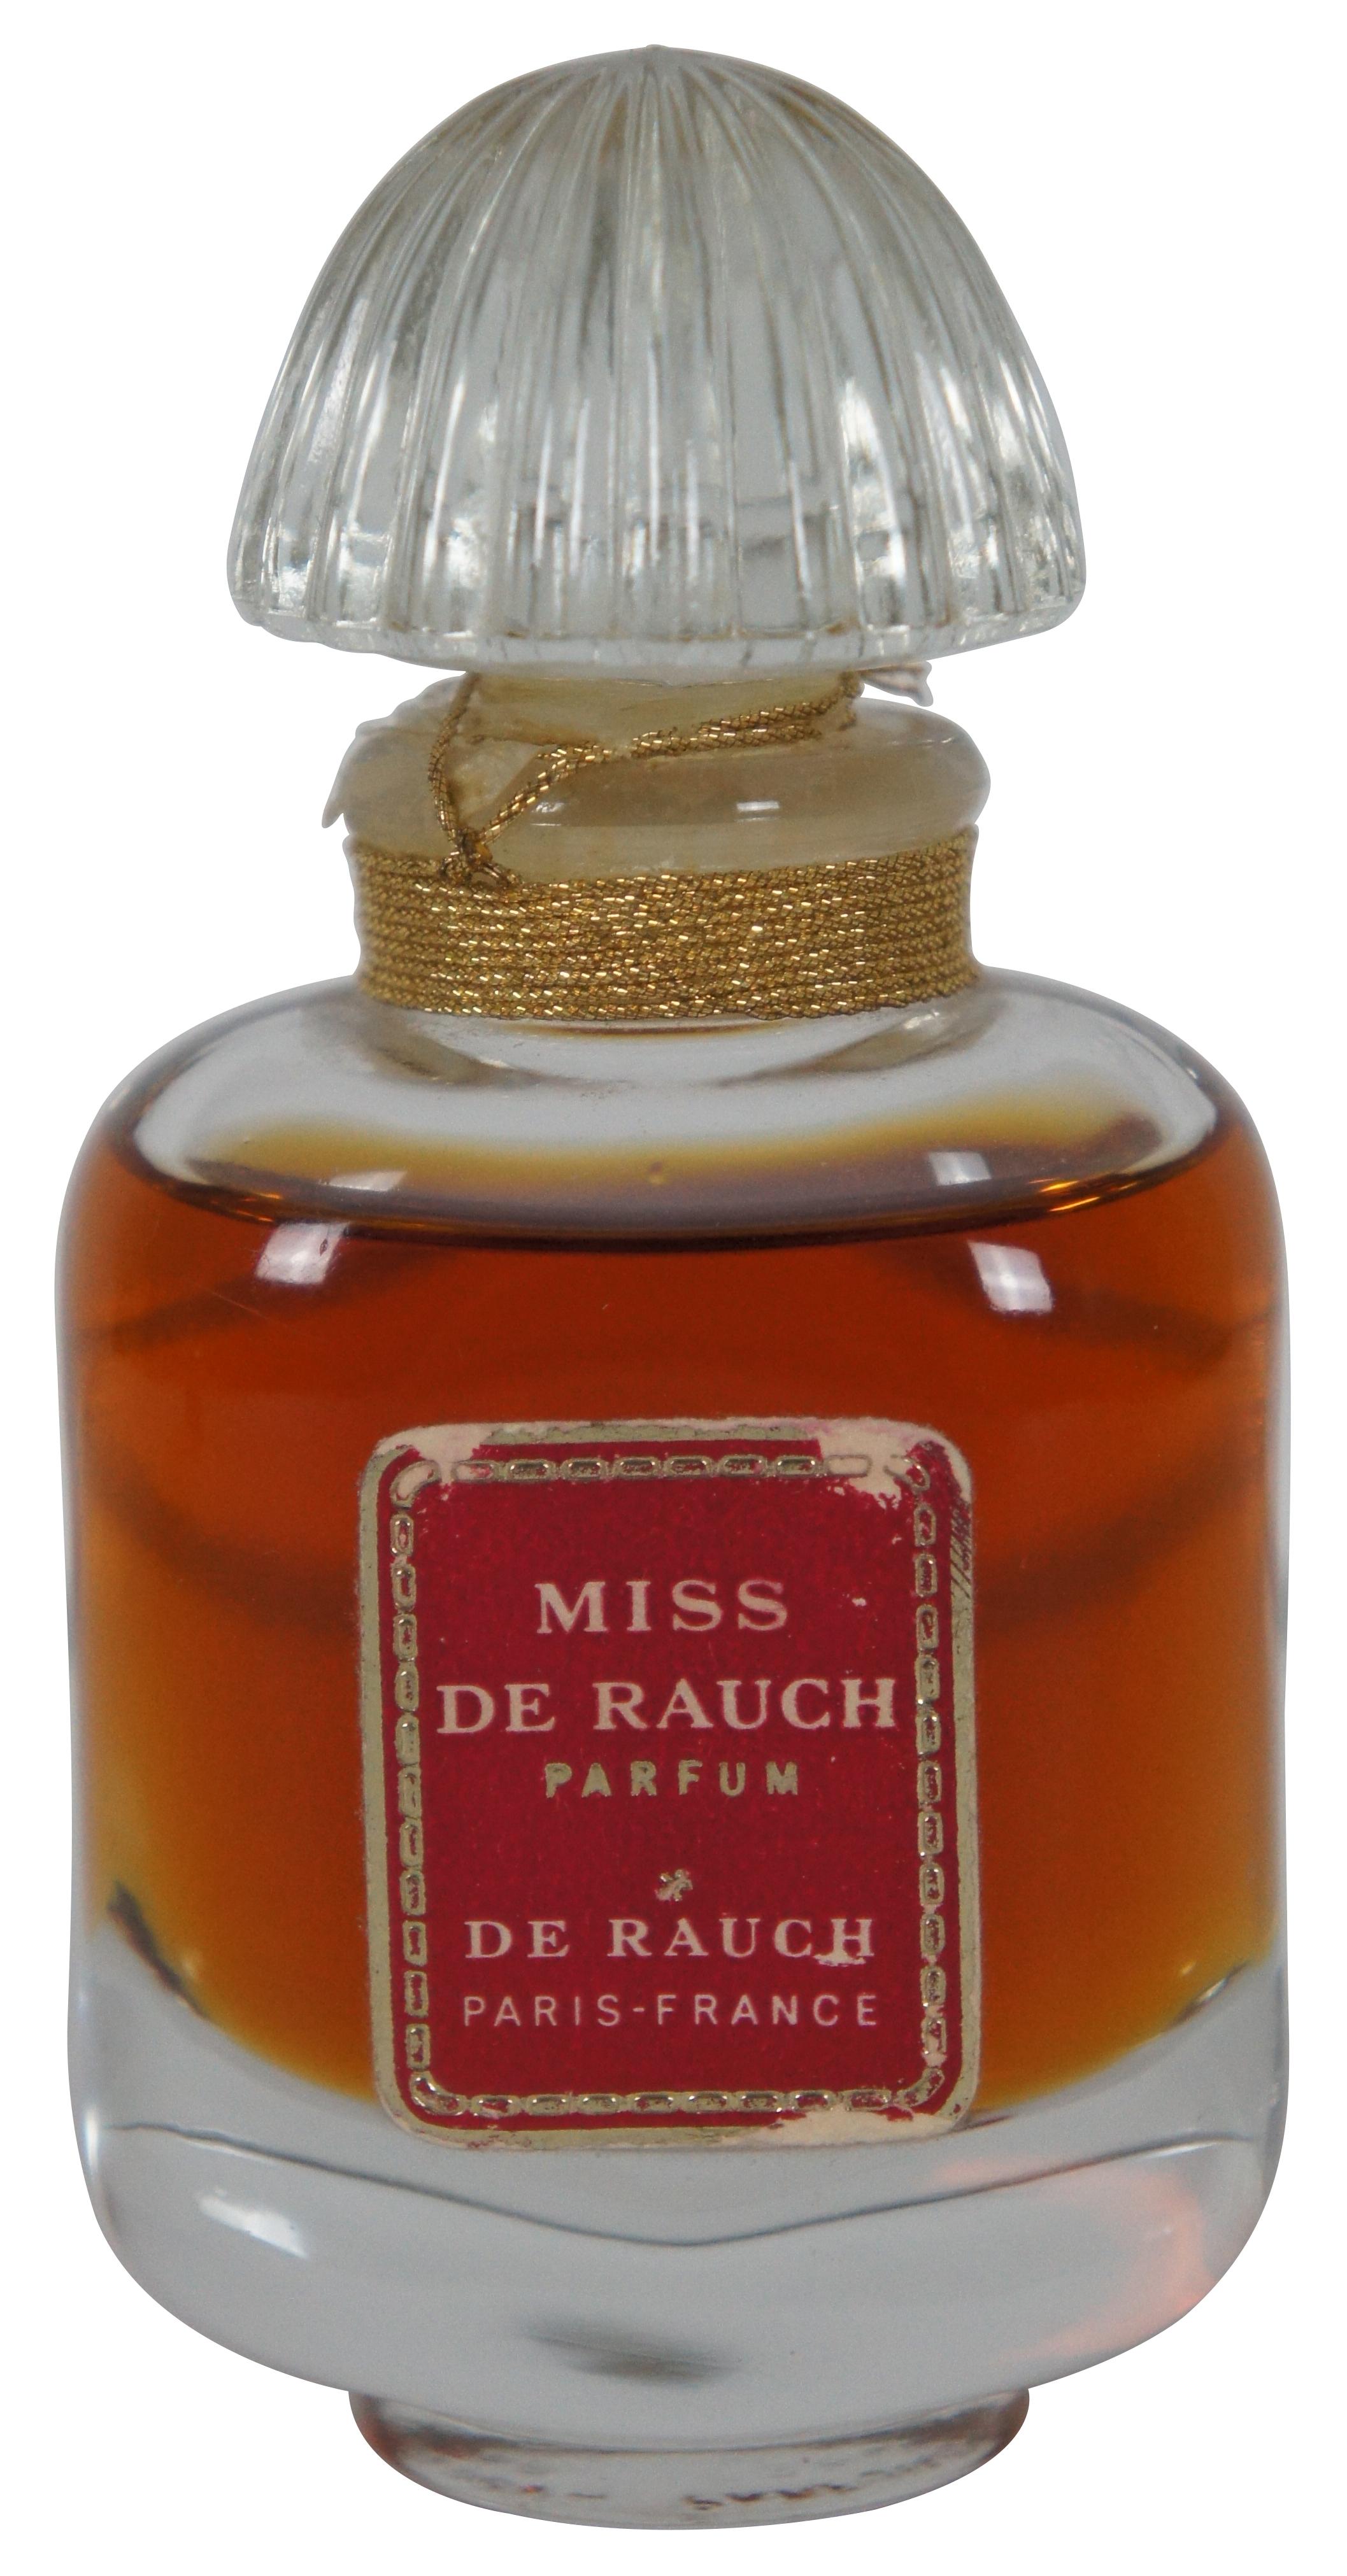 Lot of three vintage 1960s perfumes – Miss De Rauch by De Rauch, Asghar Ali & Sons version of Yves Saint Laurent, and Femme by Marcel Rochas.

Measures: Miss de Rauch - 1.75” x 1.25” x 3.675” / Asghar Ali - 1” x 1” x 2.5” / Femme - 1.25” x 0.75” x